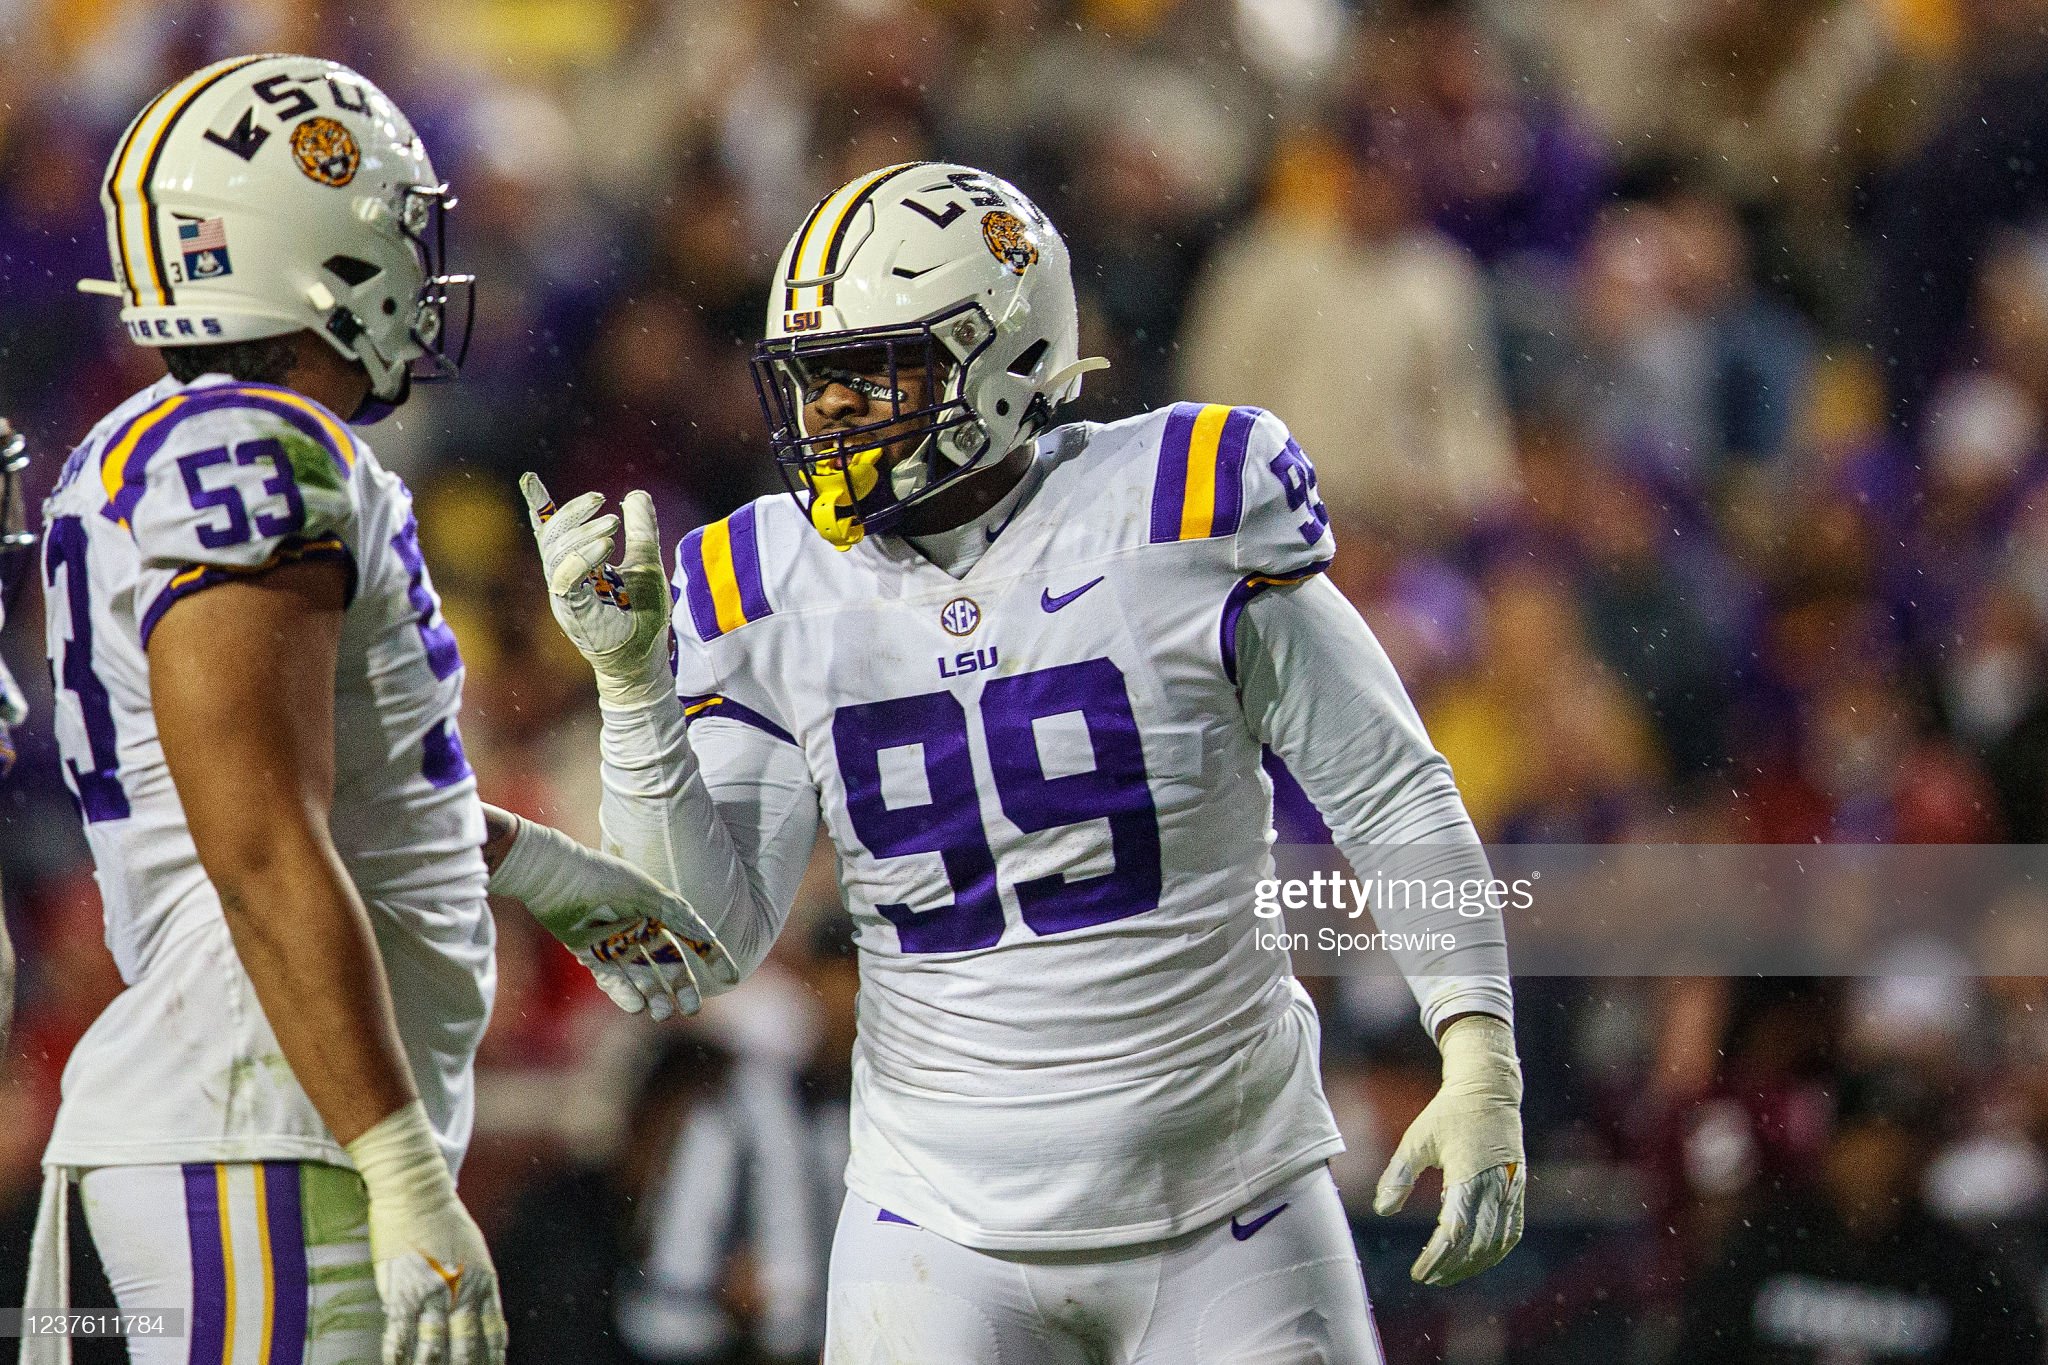 2023 NFL Draft Scouting Report: DT Jaquelin Roy, LSU